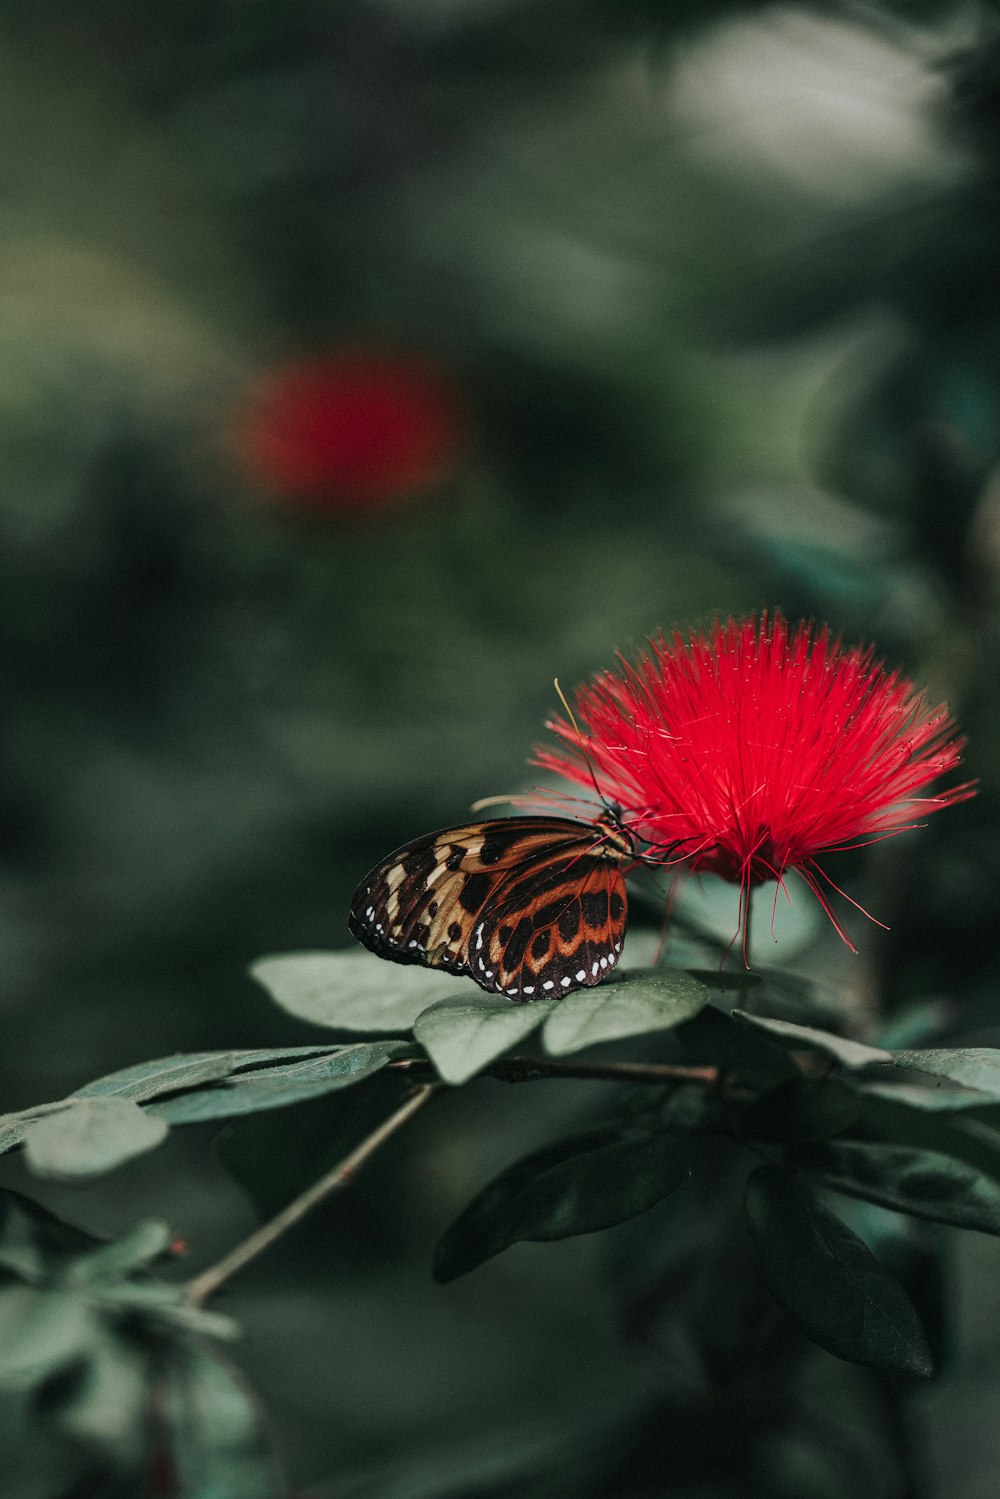 brown and black butterfly on red flower